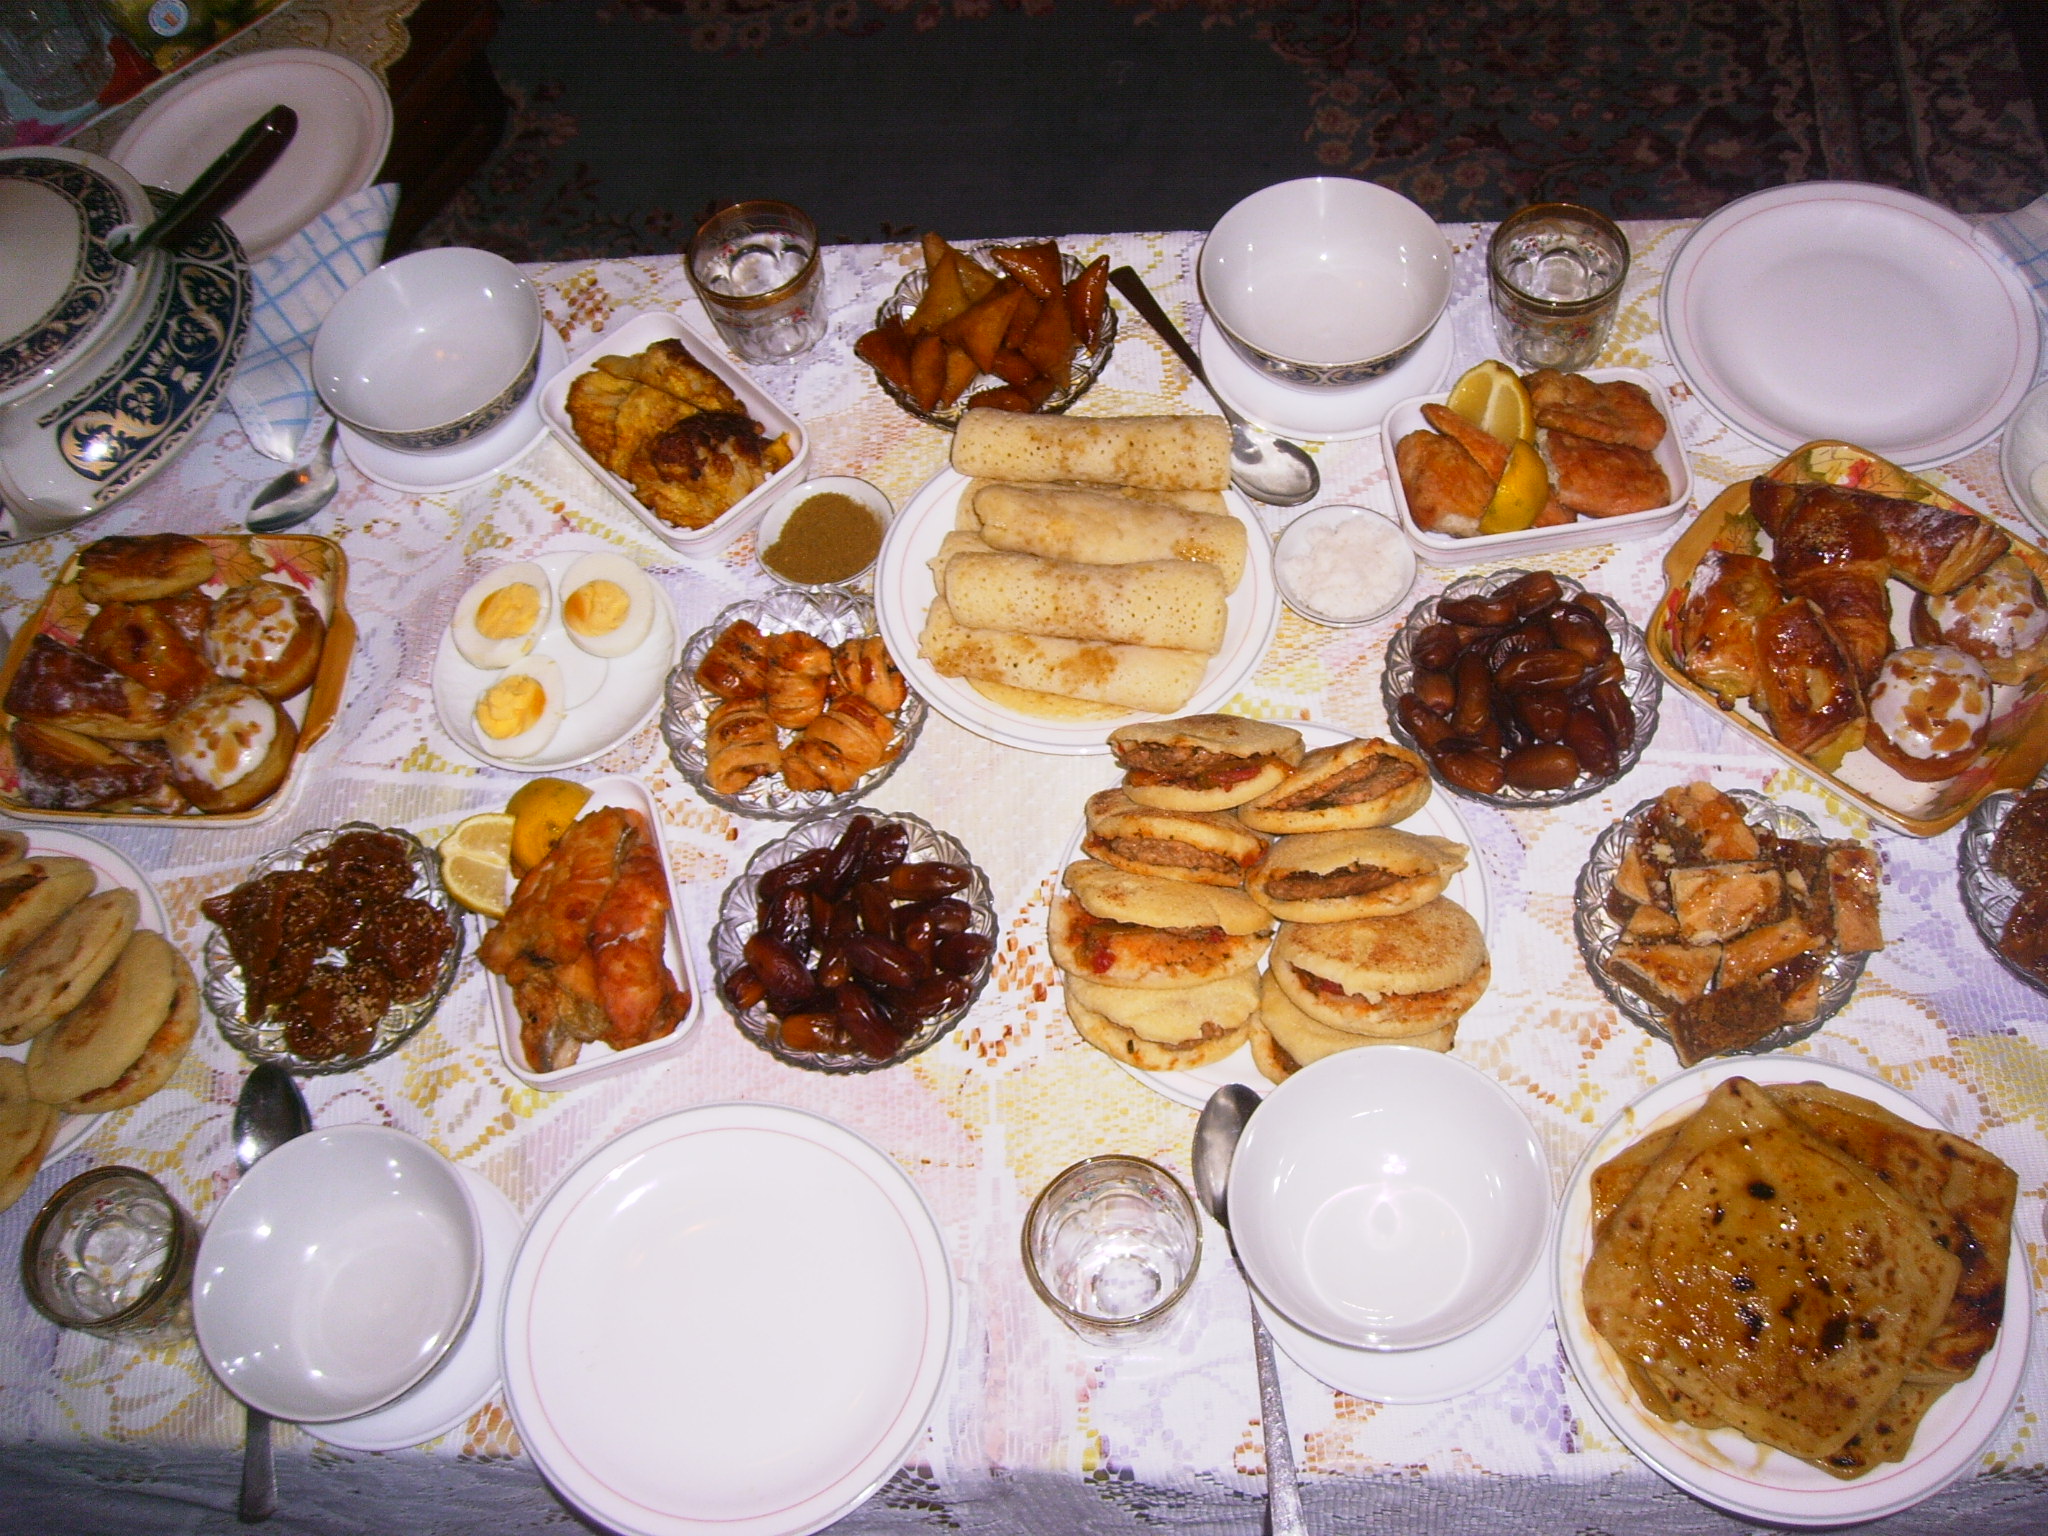 http://fr.academic.ru/pictures/frwiki/84/Traditional-ramadan-meal.JPG